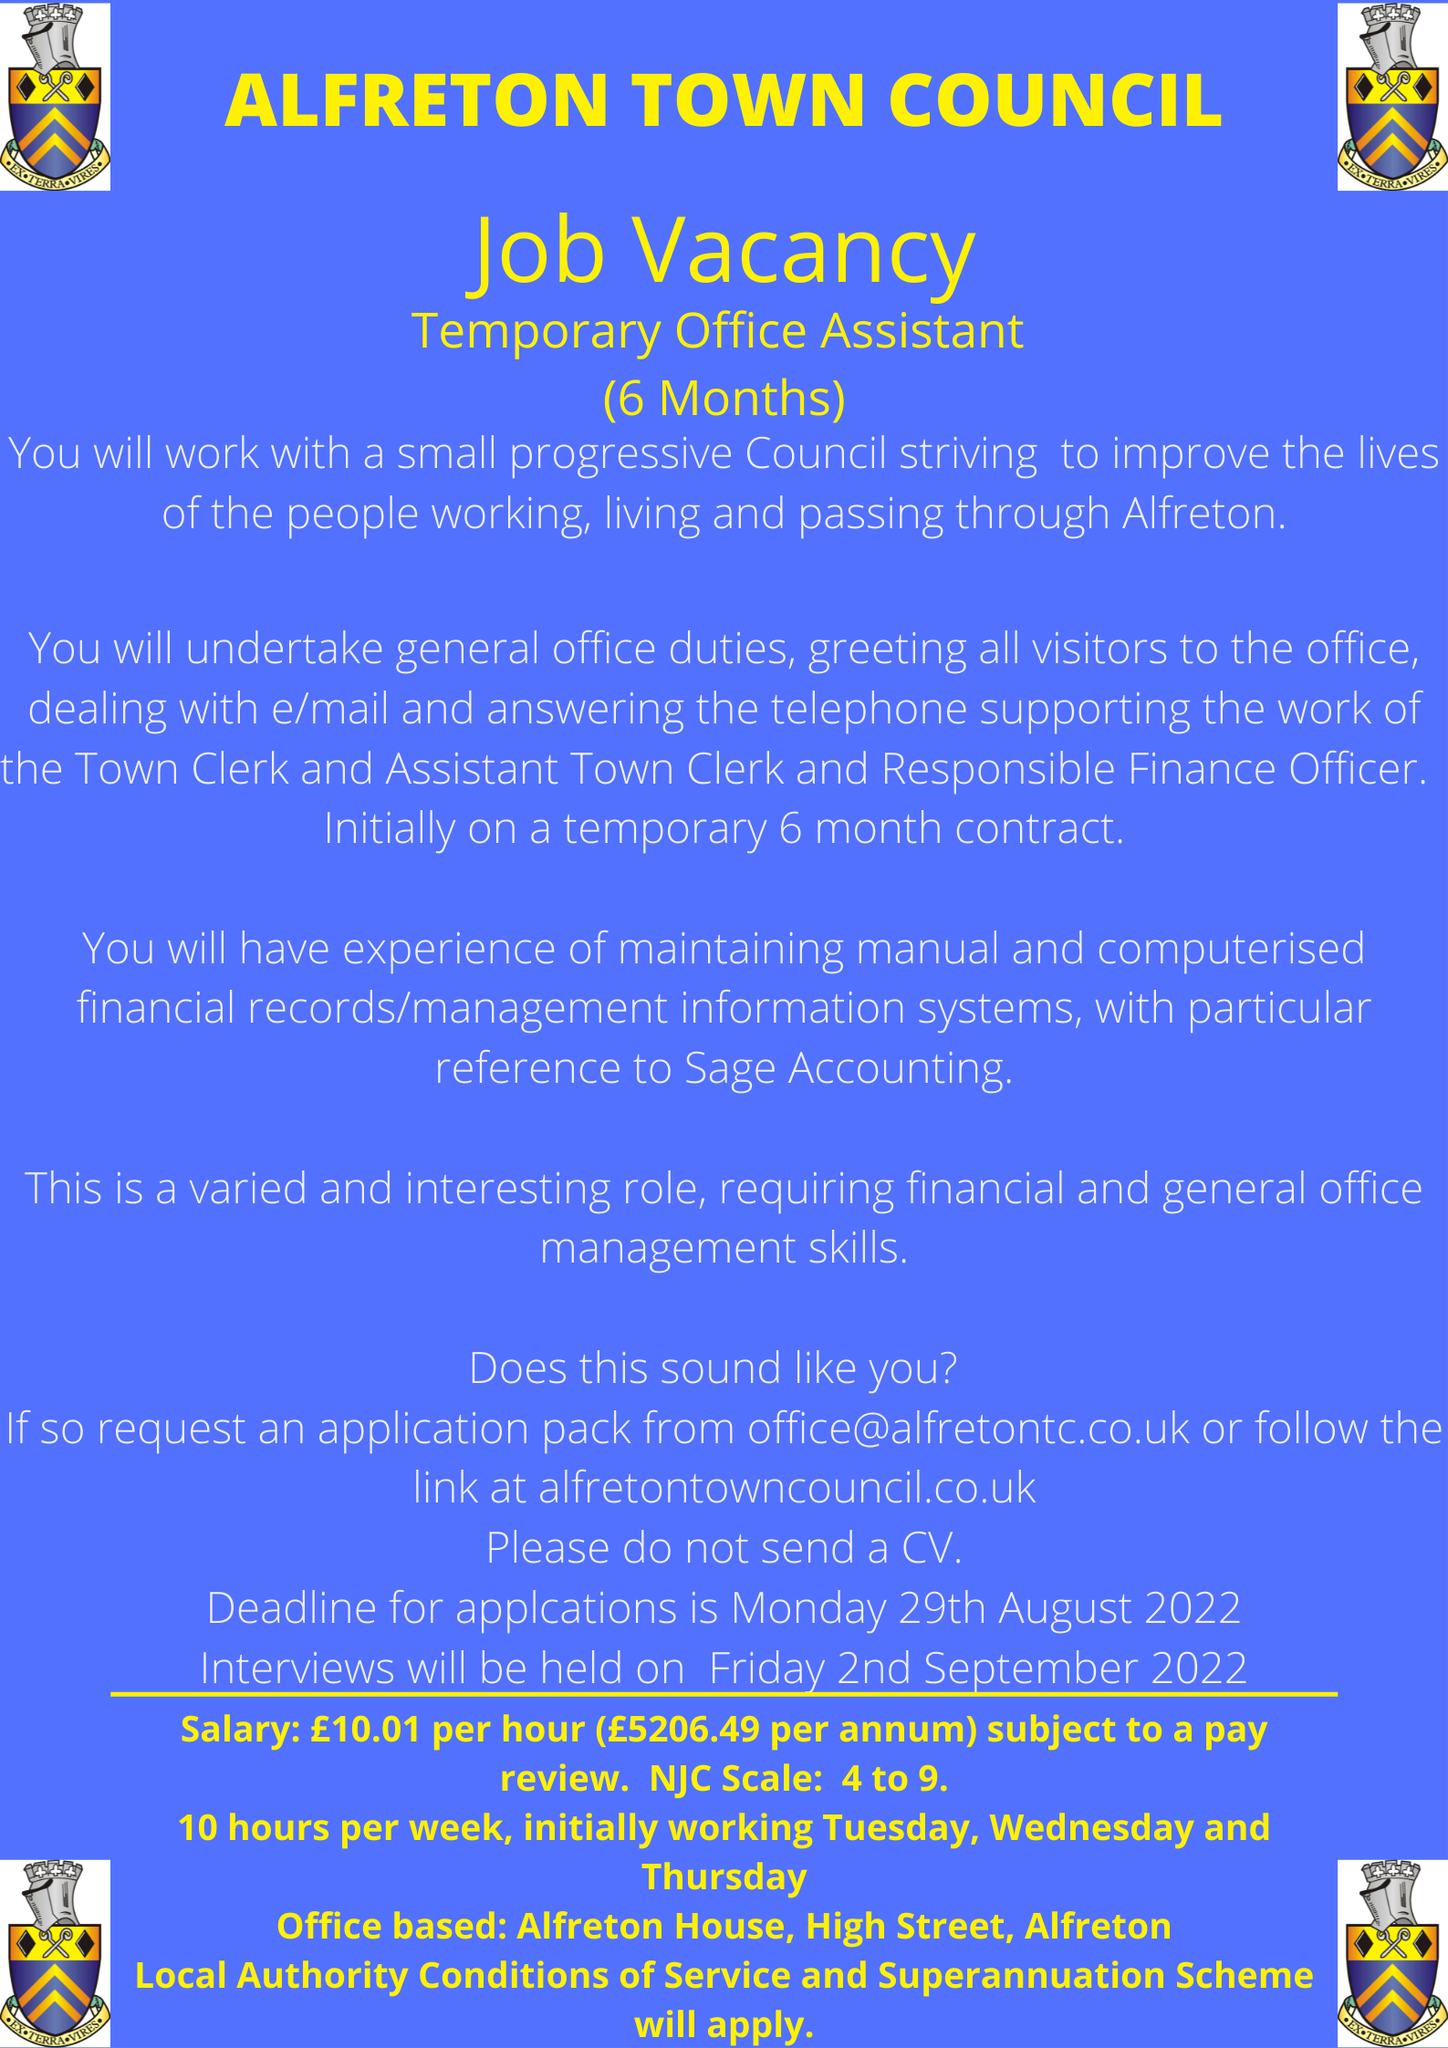 Alfreton Town Council is recruiting for an office assistant